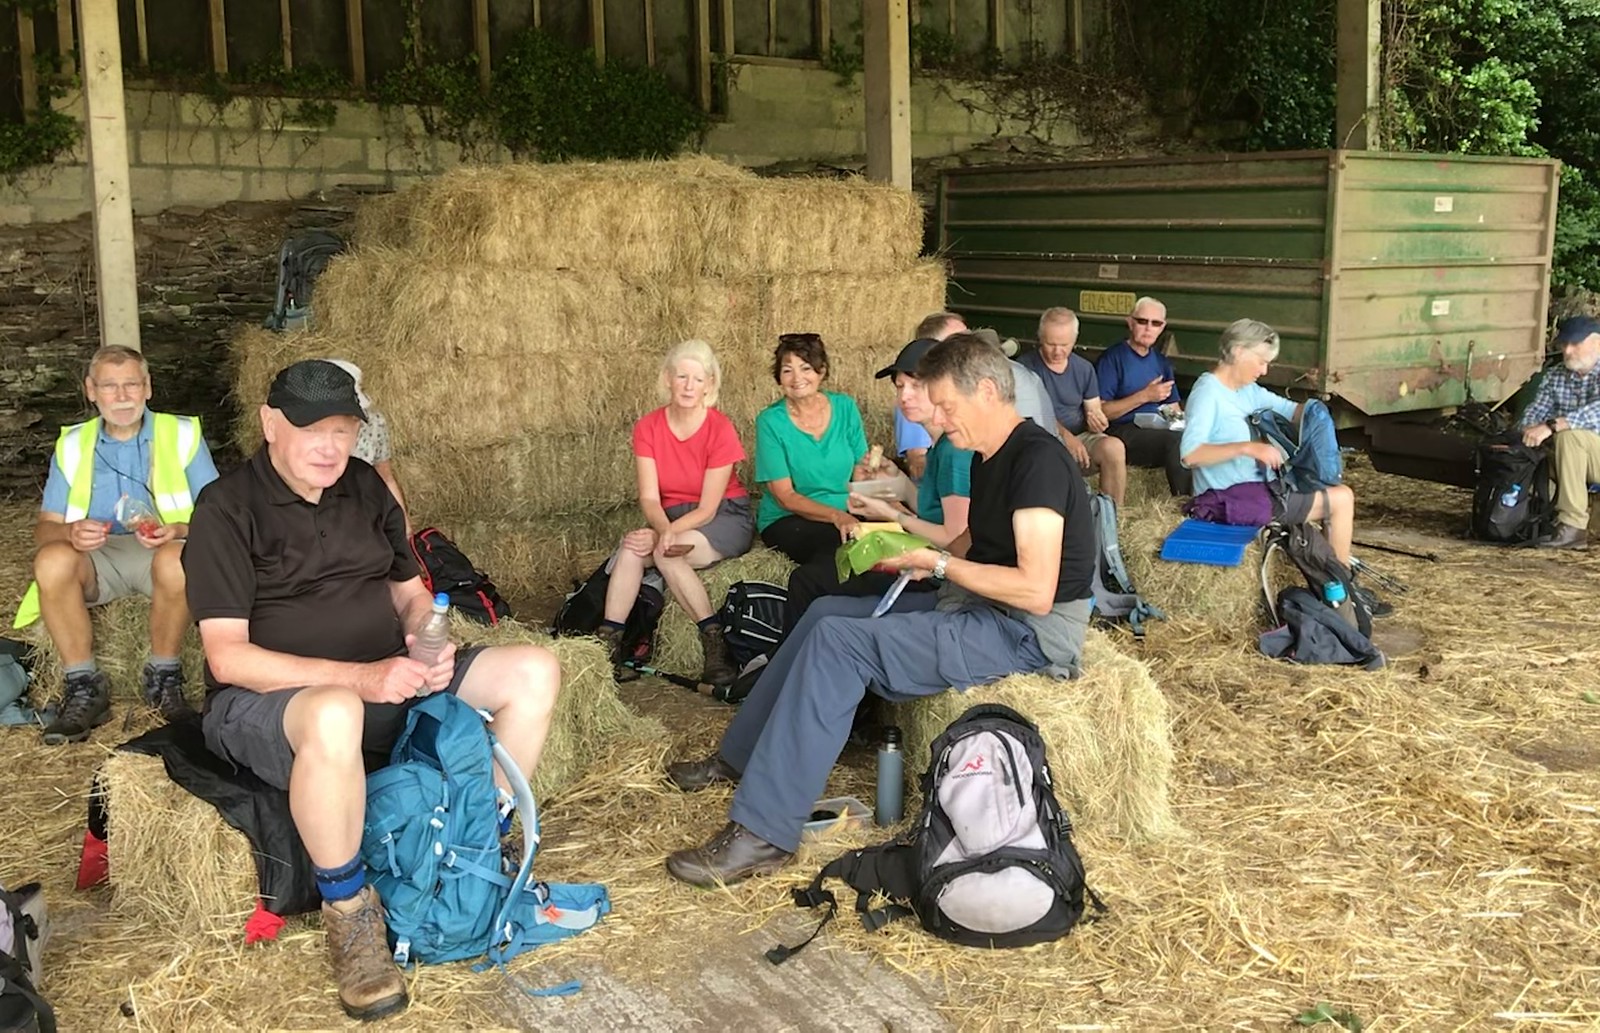 Lunch in the barn - George’s walk - Sunday 23rd July 2020